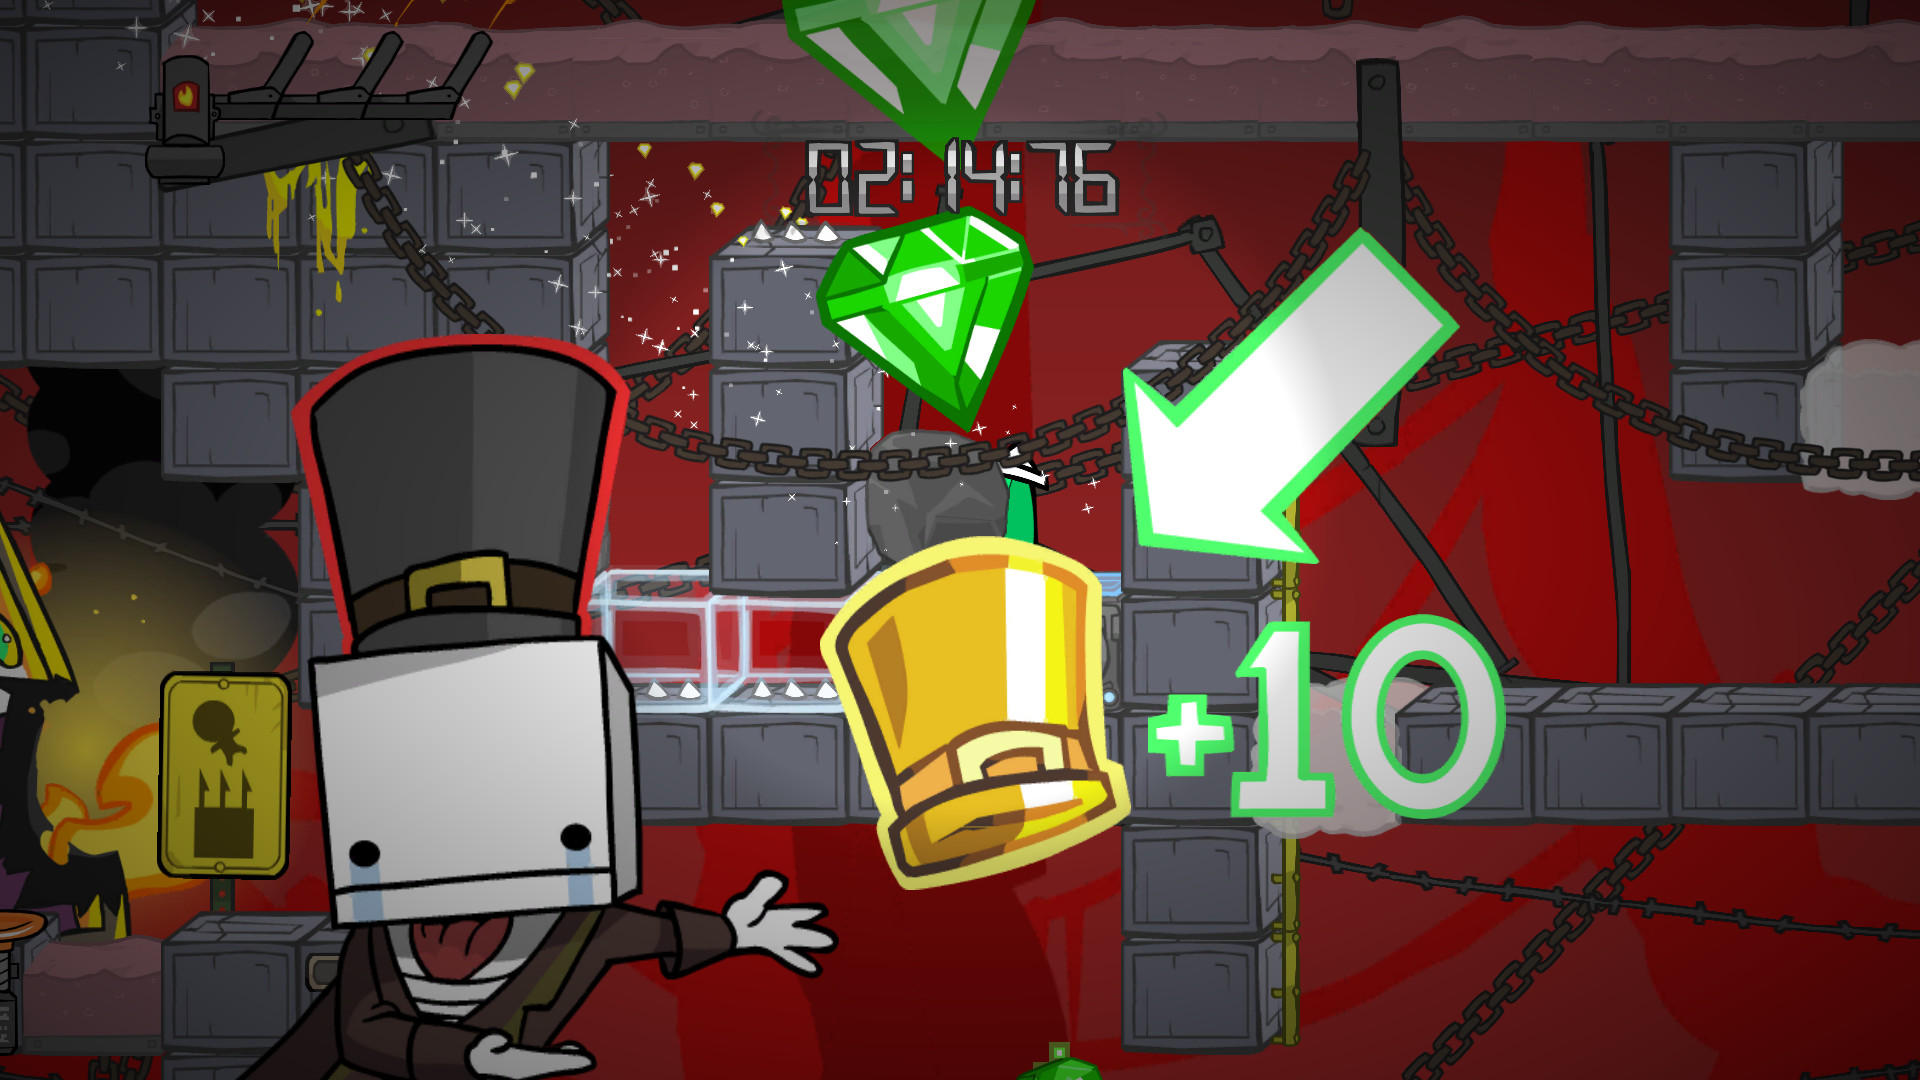 BattleBlock Theater Windows From time to time a golden hat will appear randomly in a level